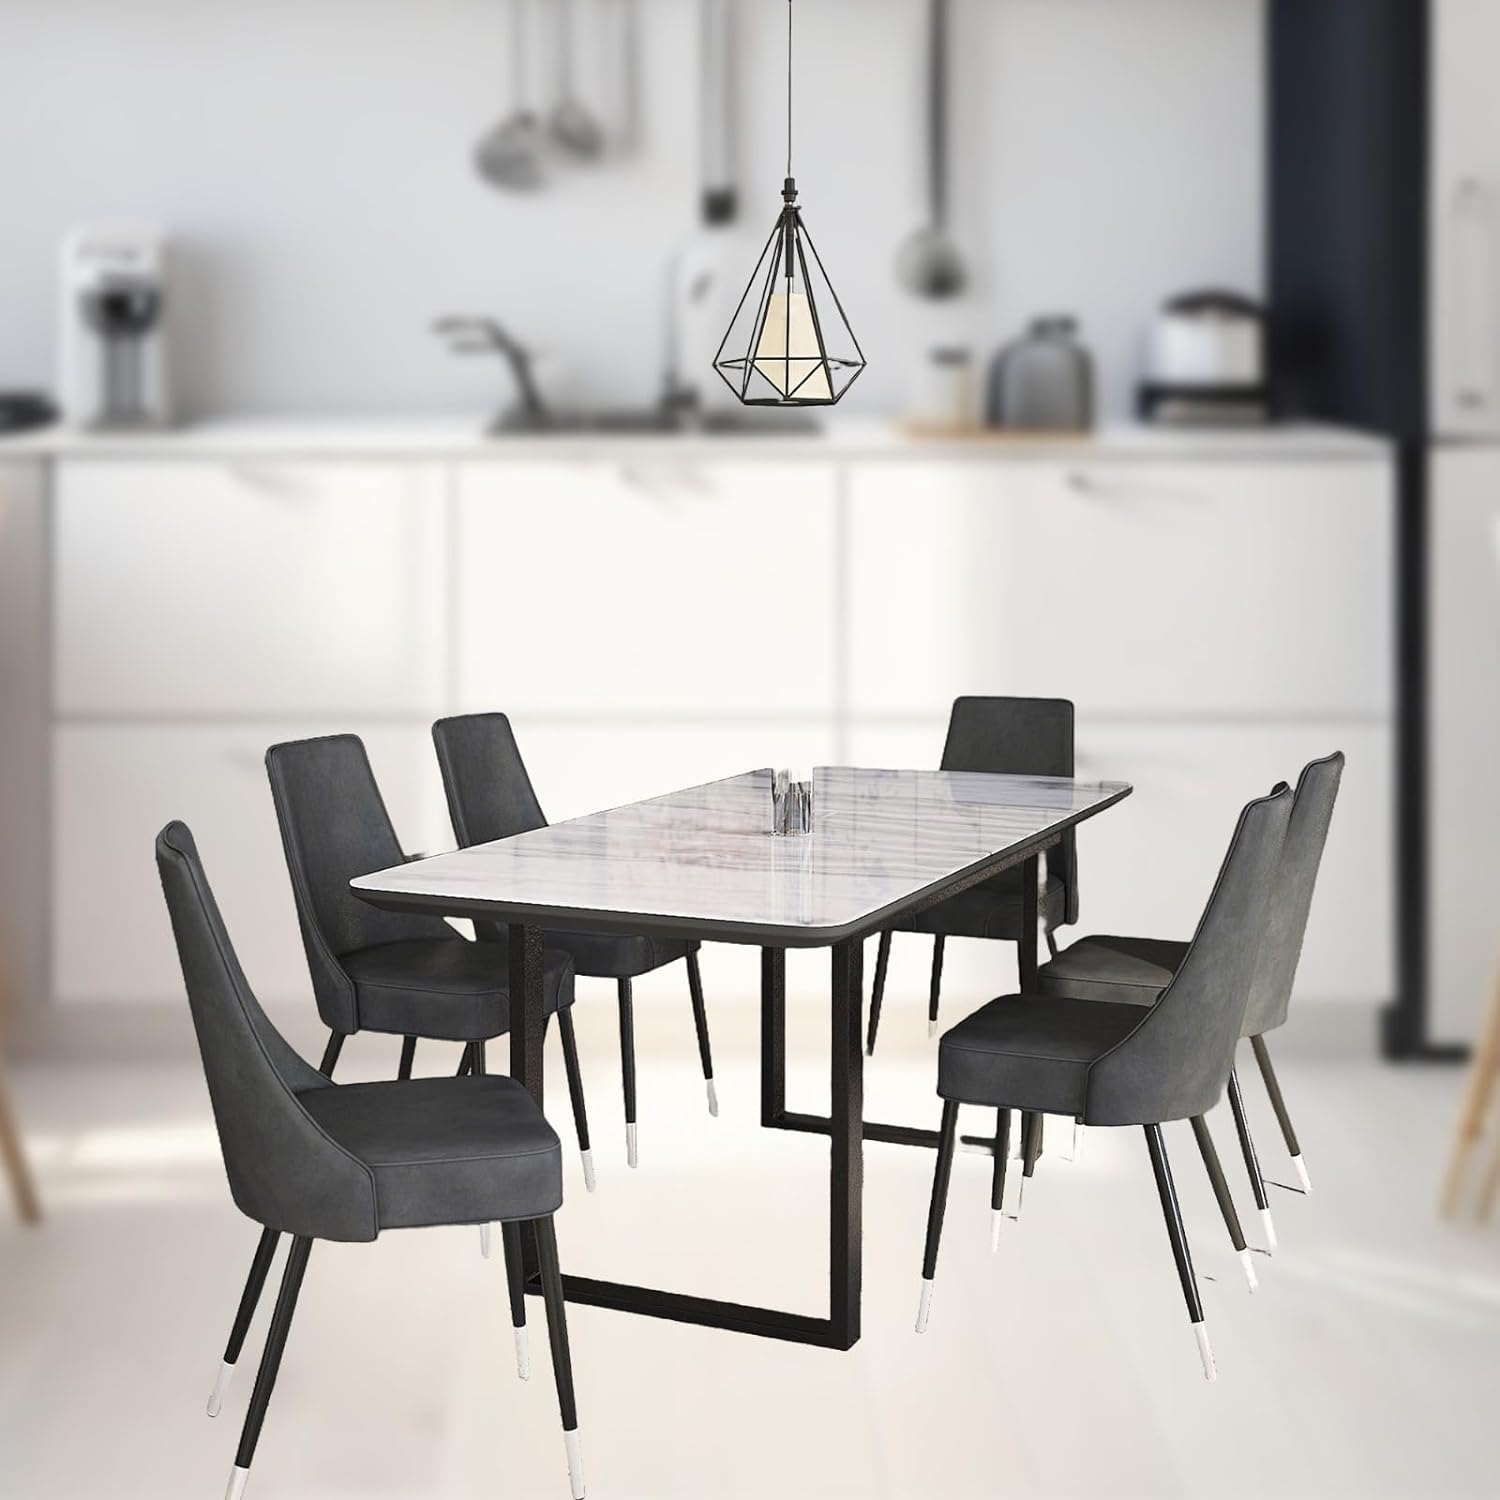 Cosmic Homes 7 Pc Dining Table Set for 6 Black Dining Table Black with Vintage Grey Chair Set for 6 Chaise de Cuisine, Dining Chair for Modern Kitchen | Small Kitchen Table & Chais